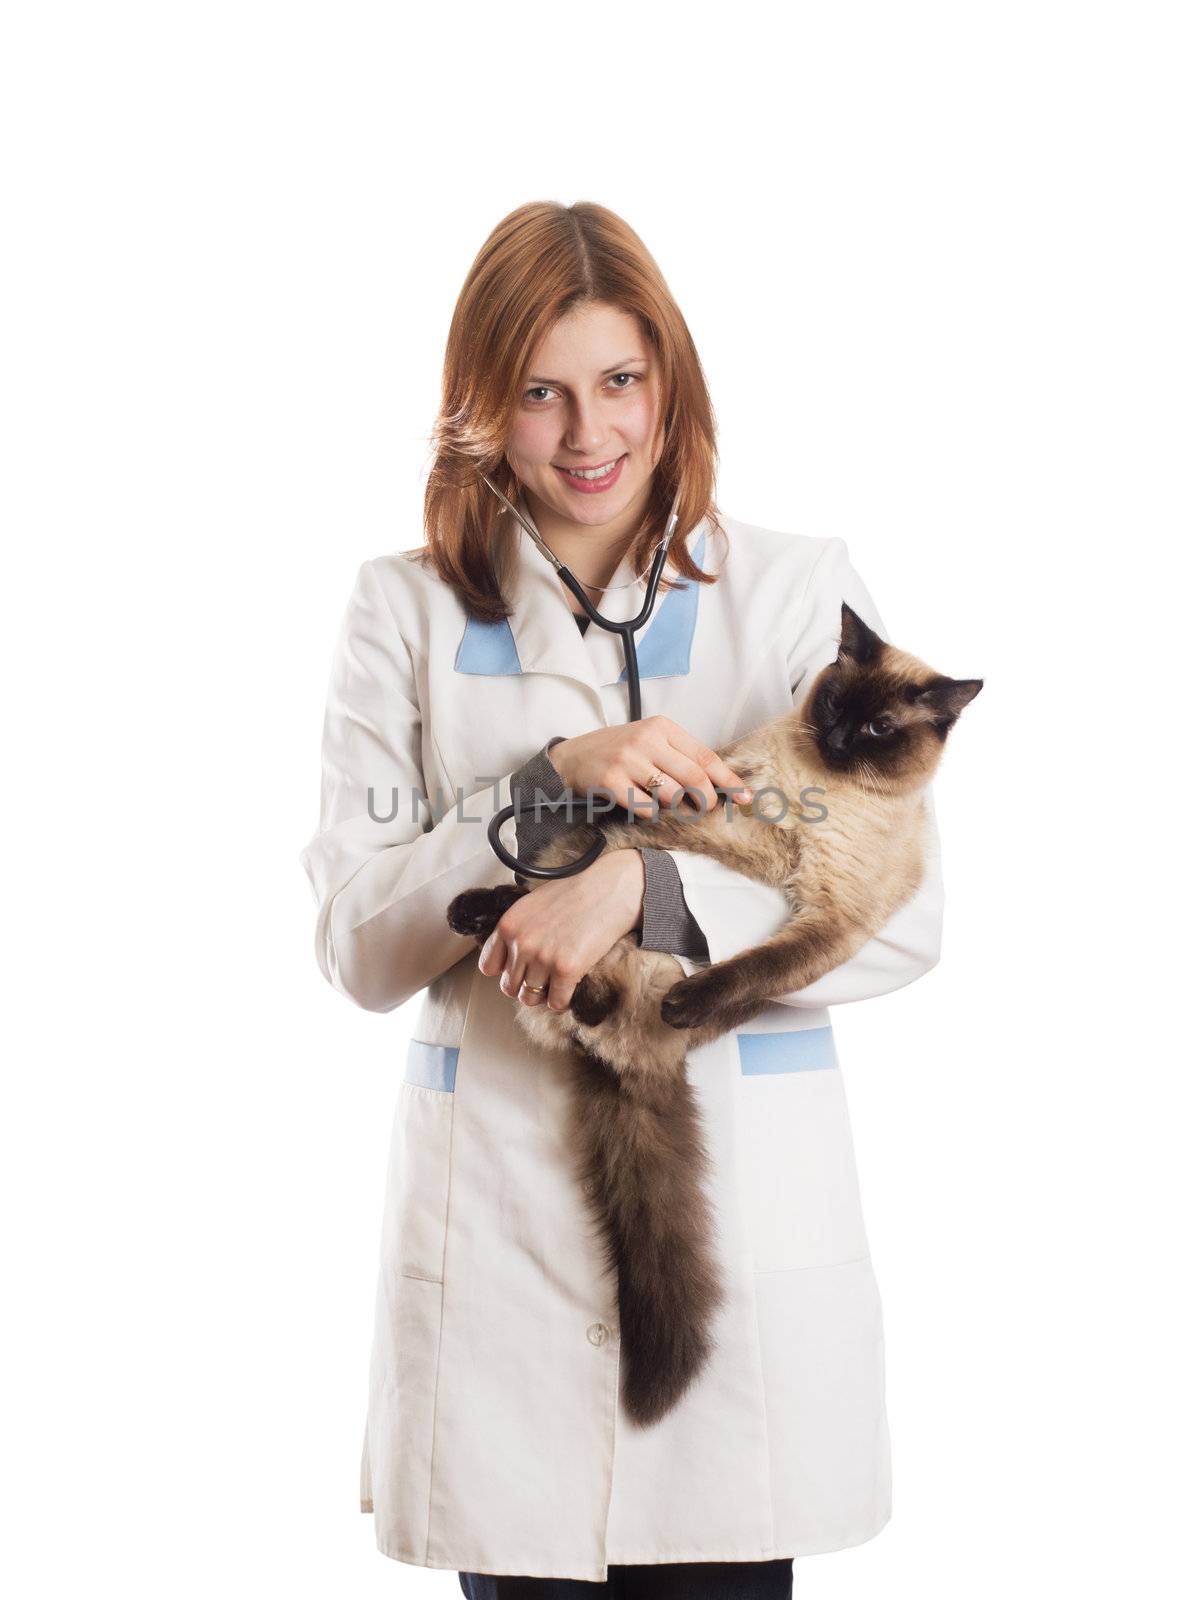 veterinarian inspects a Siamese cat  by gurin_oleksandr